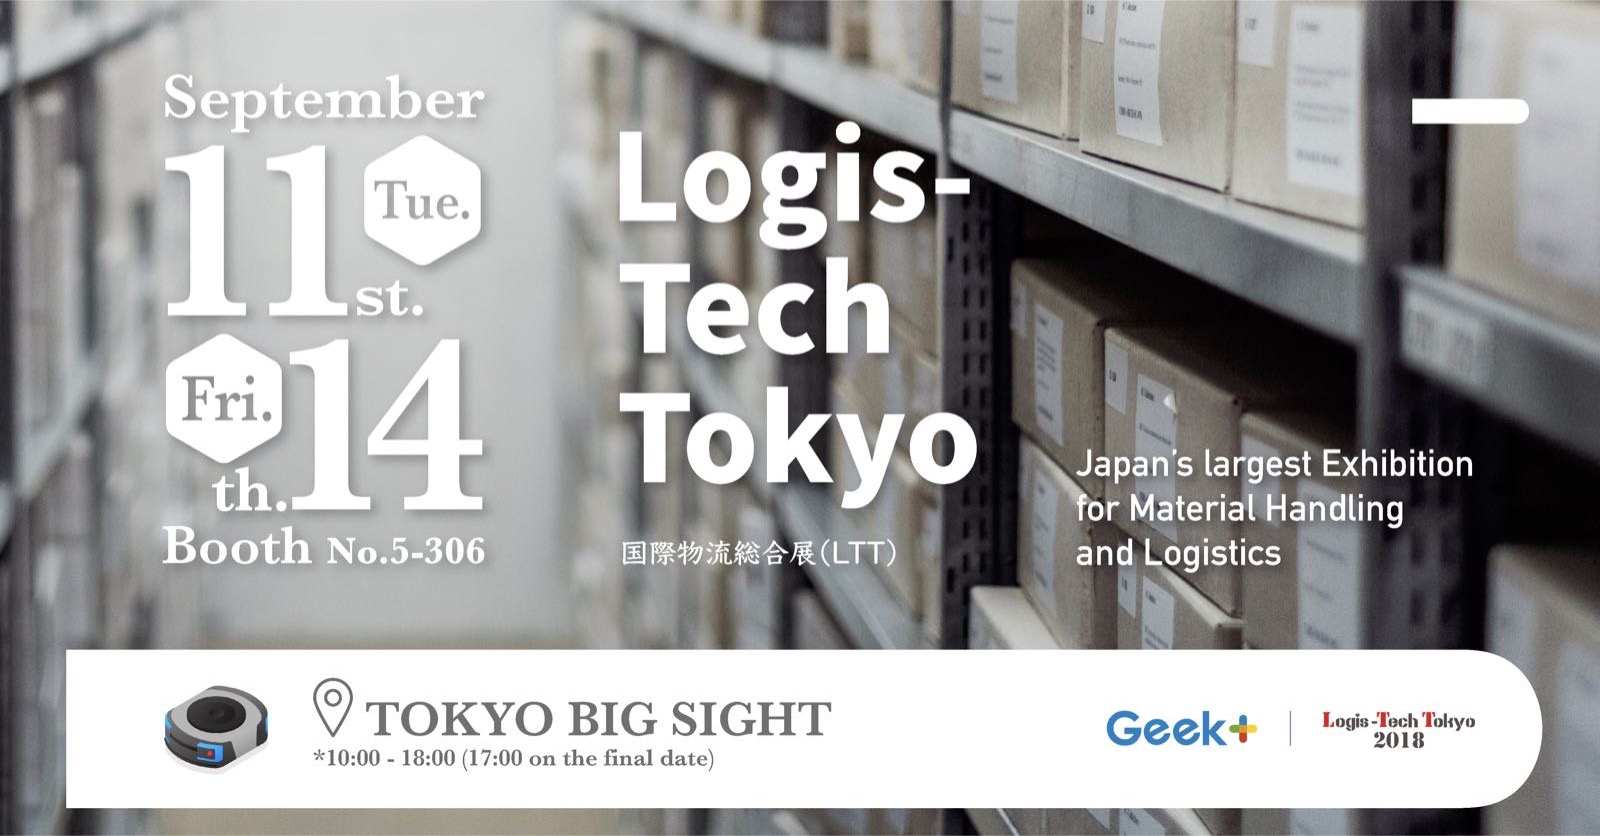 Geek+ is in Tokyo, come to talk to us!
